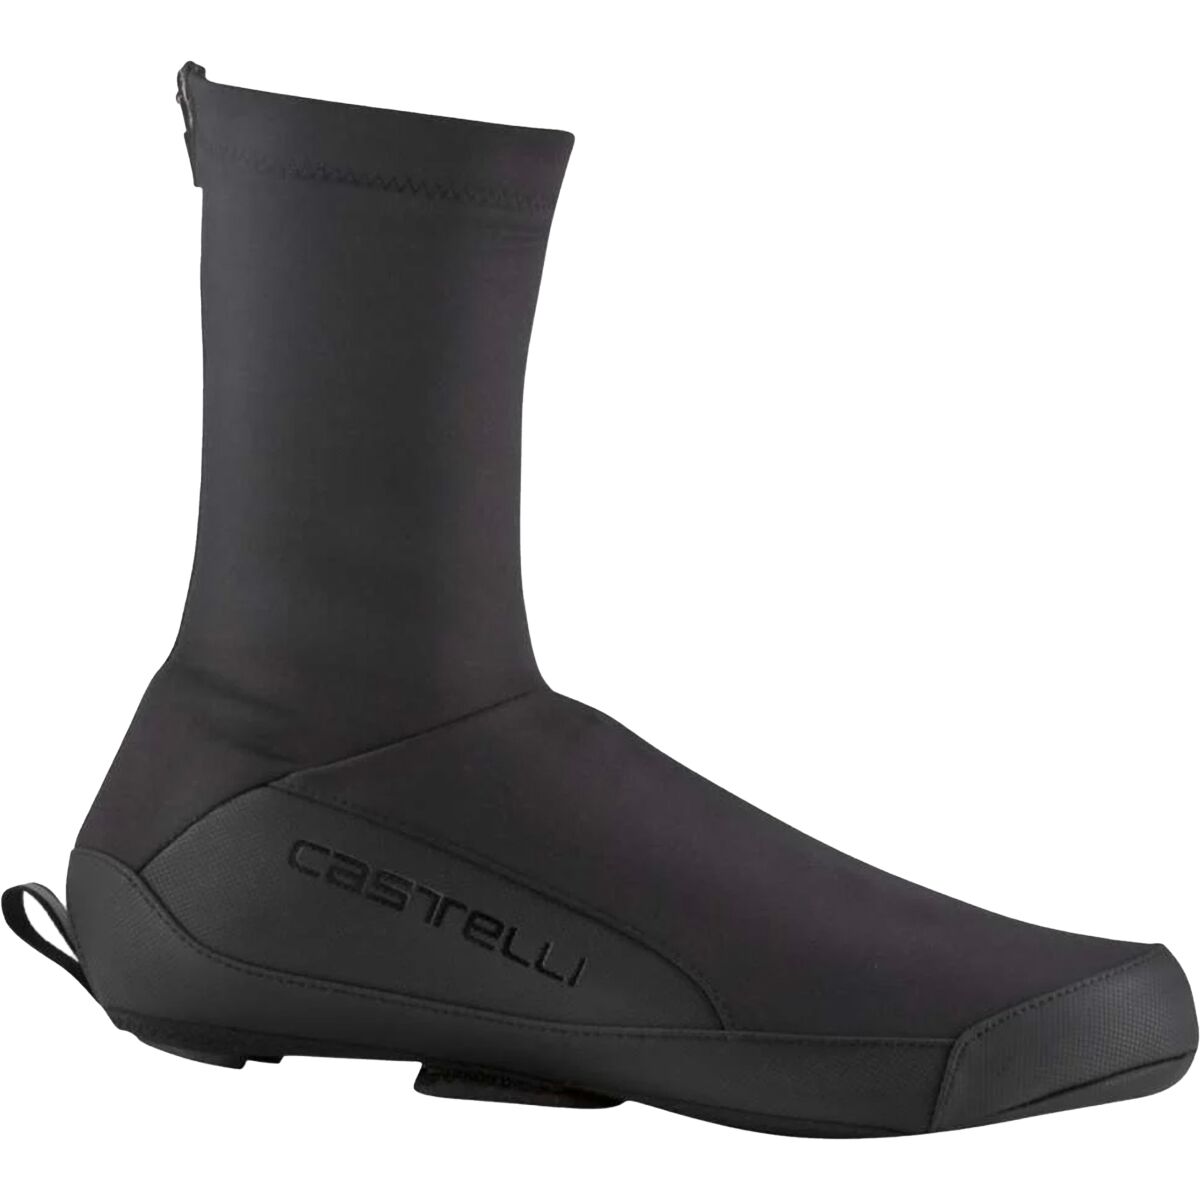 Castelli Unlimited Shoecover